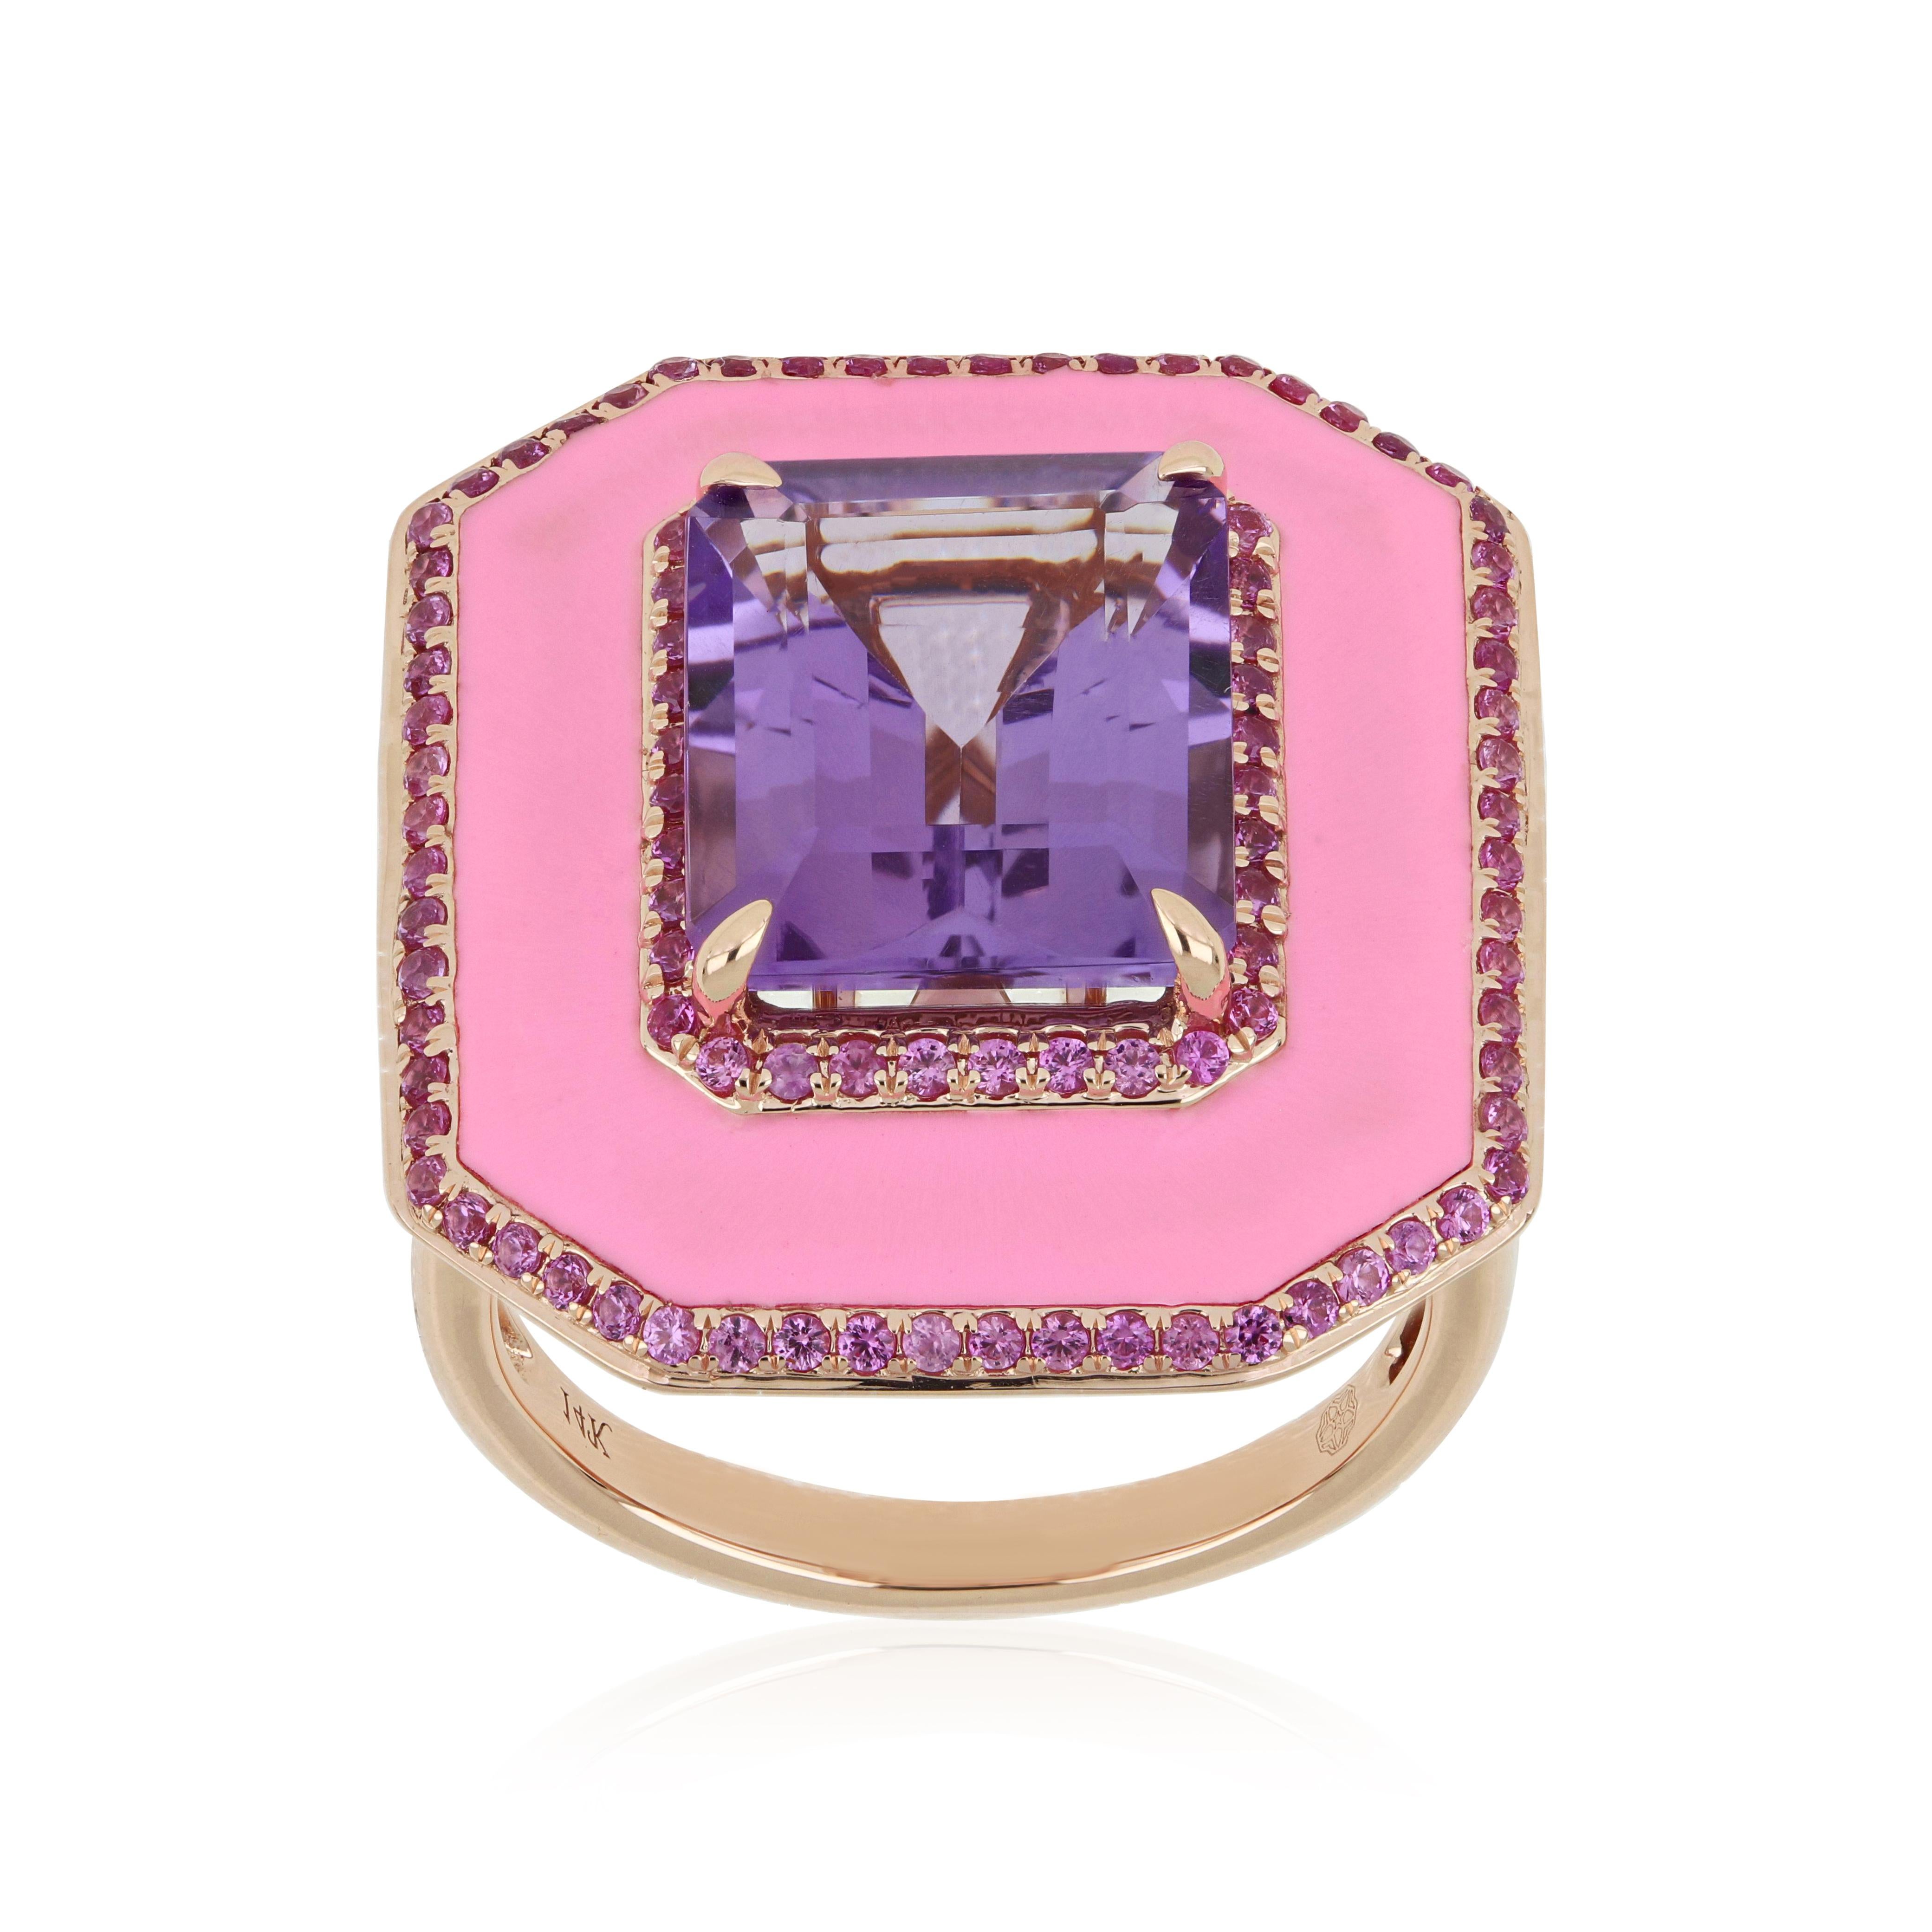 Indulge in the opulence of our meticulously crafted 14 karat Rose Gold Ring, adorned with a resplendent 5.38 carat (approx.) Octagon Cut Pink Amethyst nestled at its heart. Encircled by exquisite Enamel detailing and embraced by a halo of precious